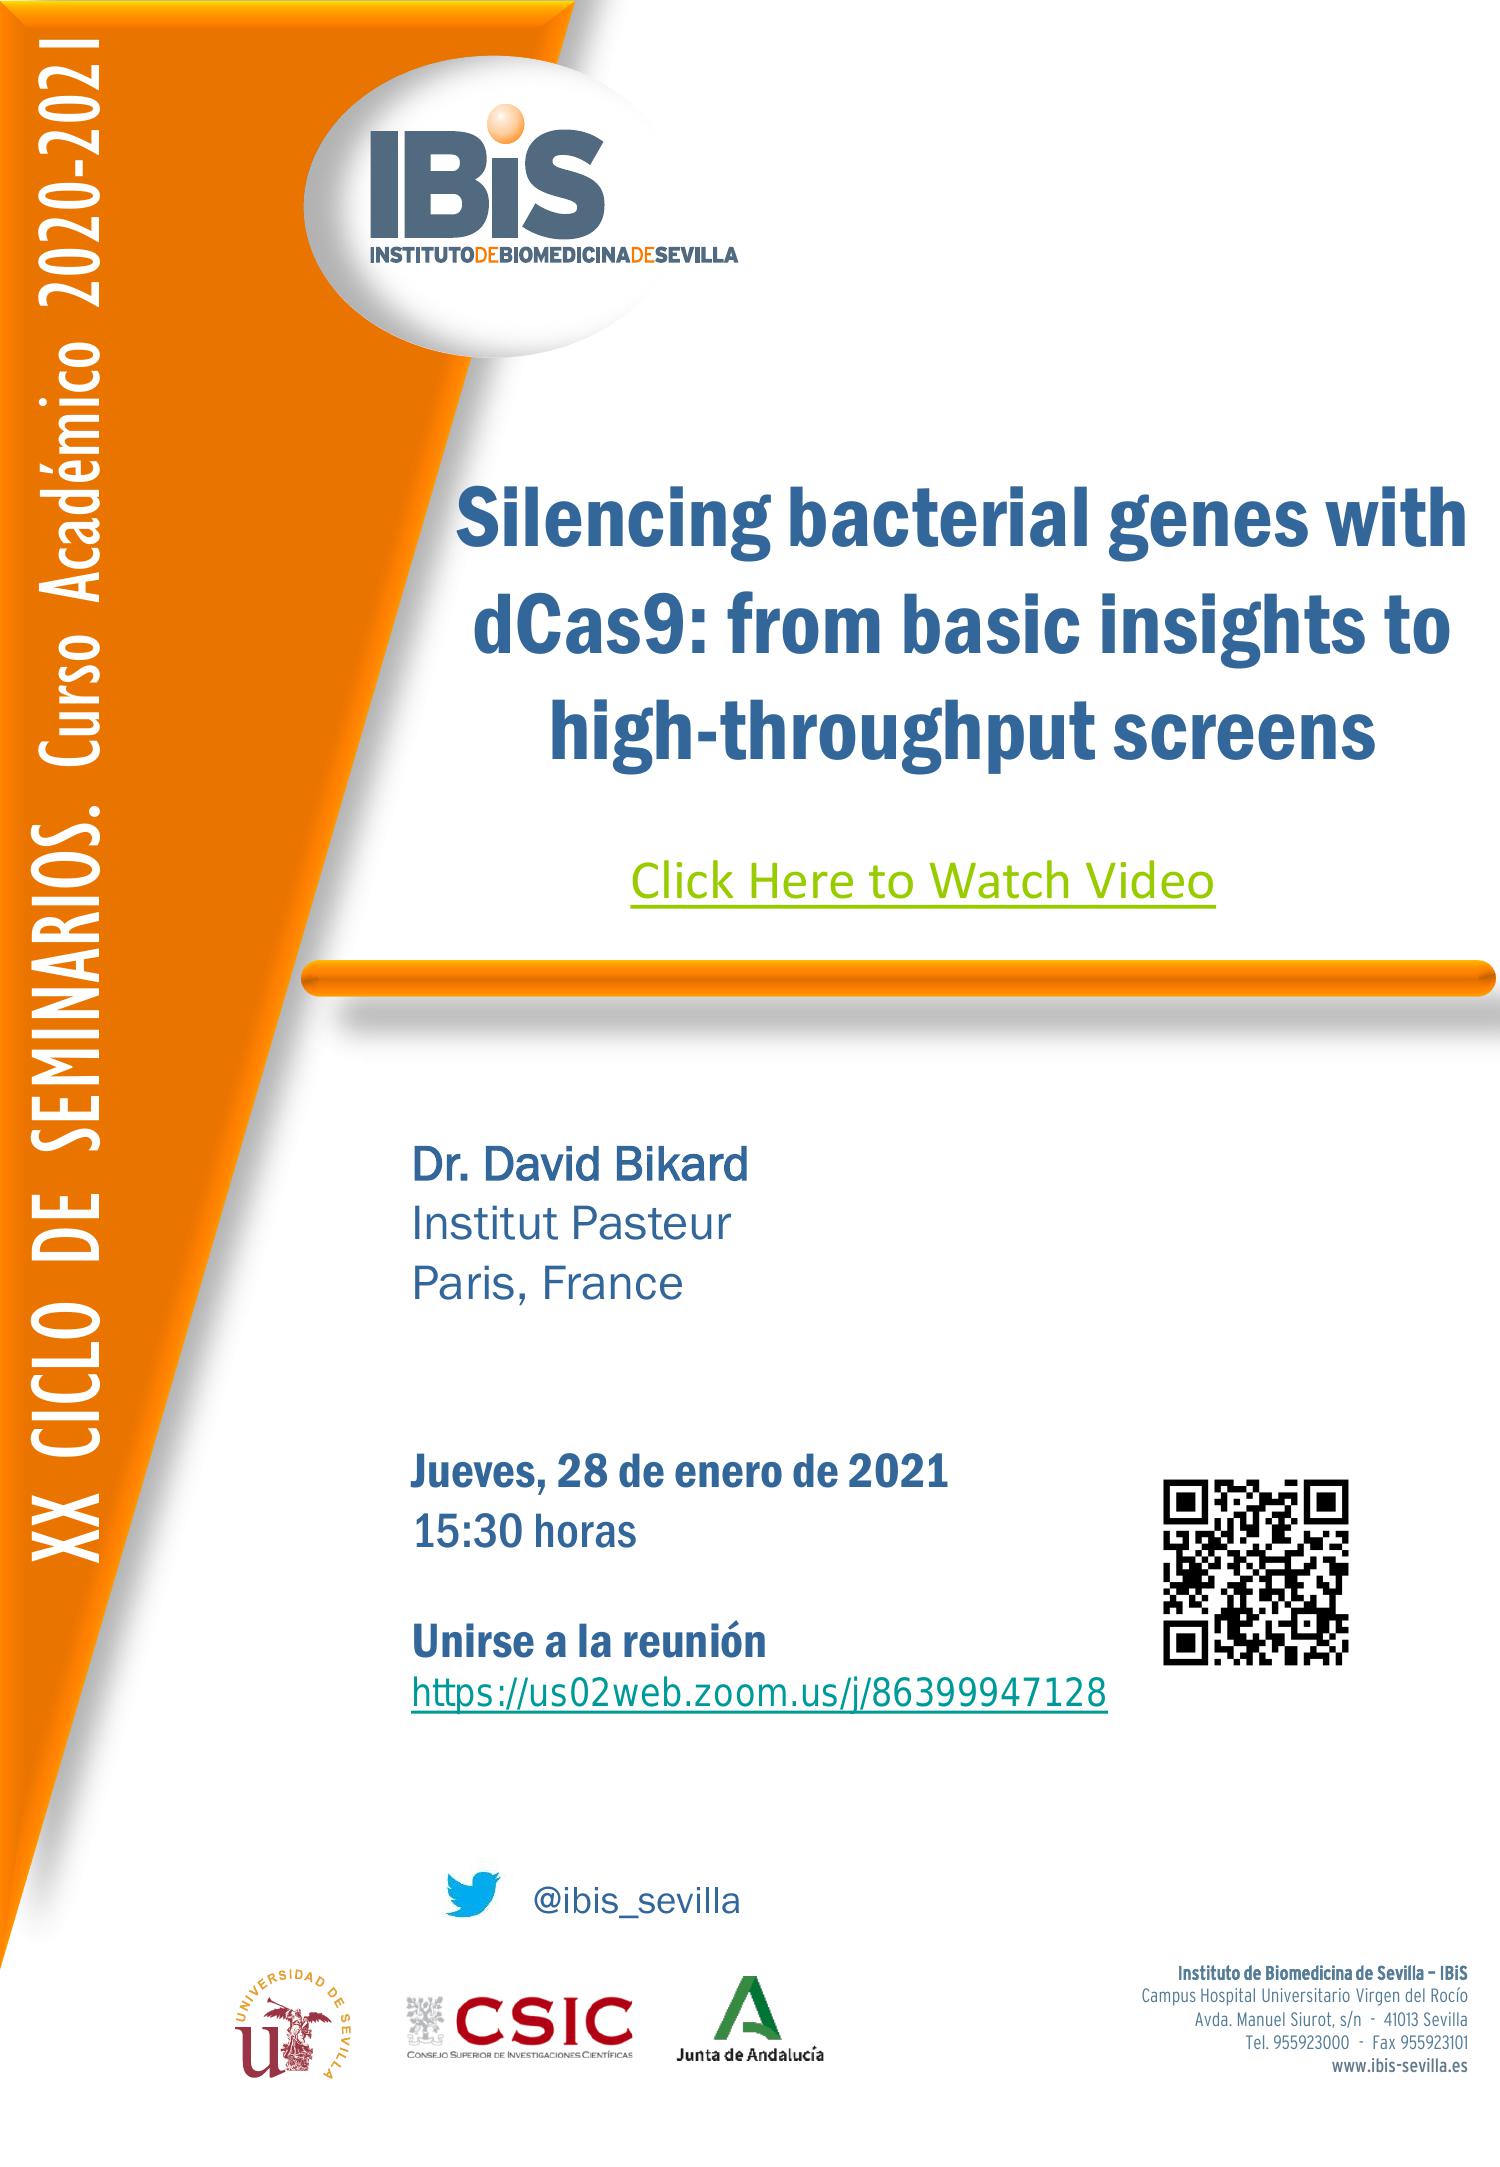 Poster: Silencing bacterial genes with dCas9: from basic insights to high-throughput screens